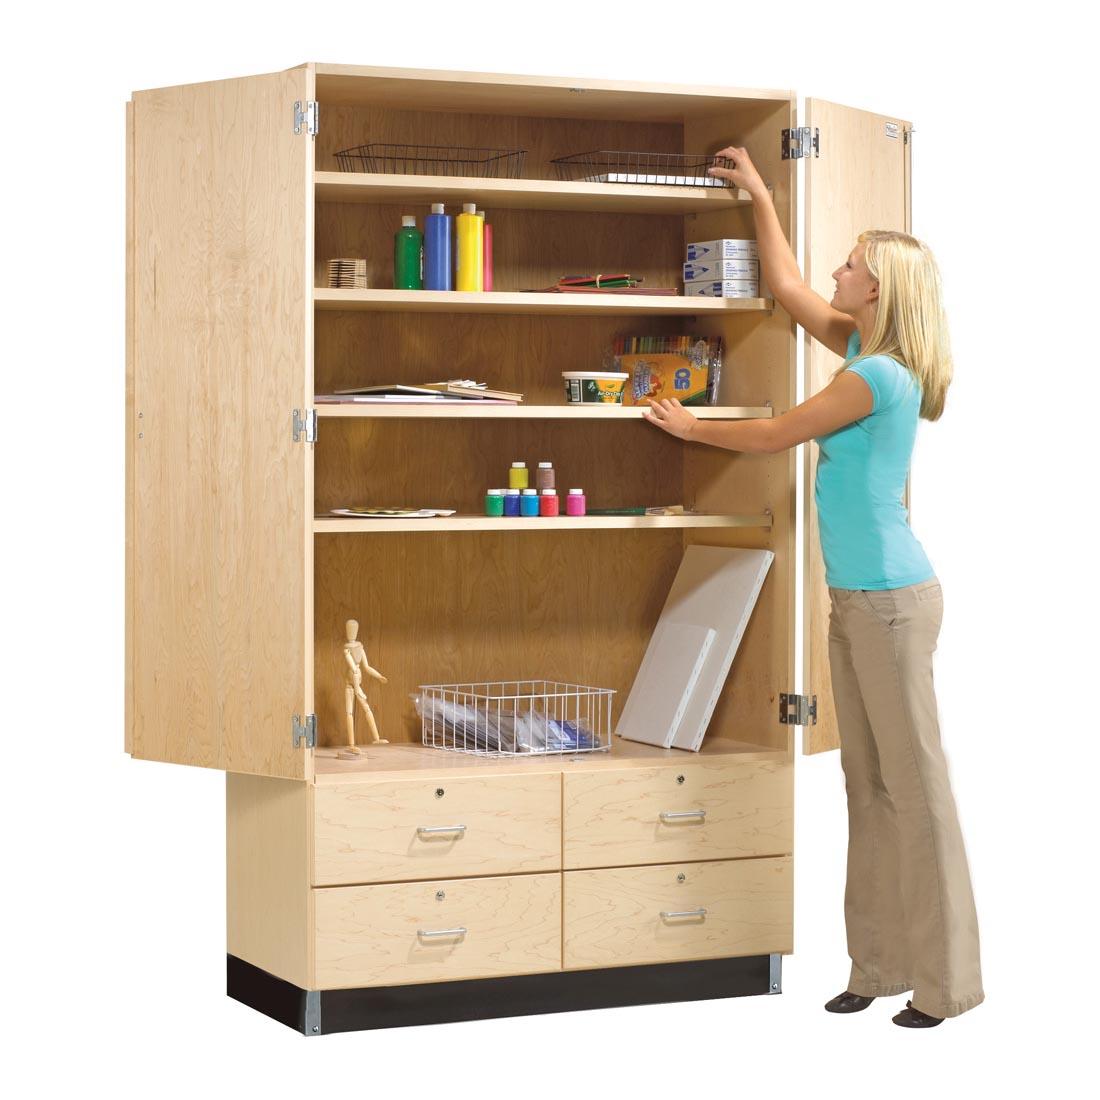 Adult reaching into General Storage Cabinet which is open and shown filled with art supplies